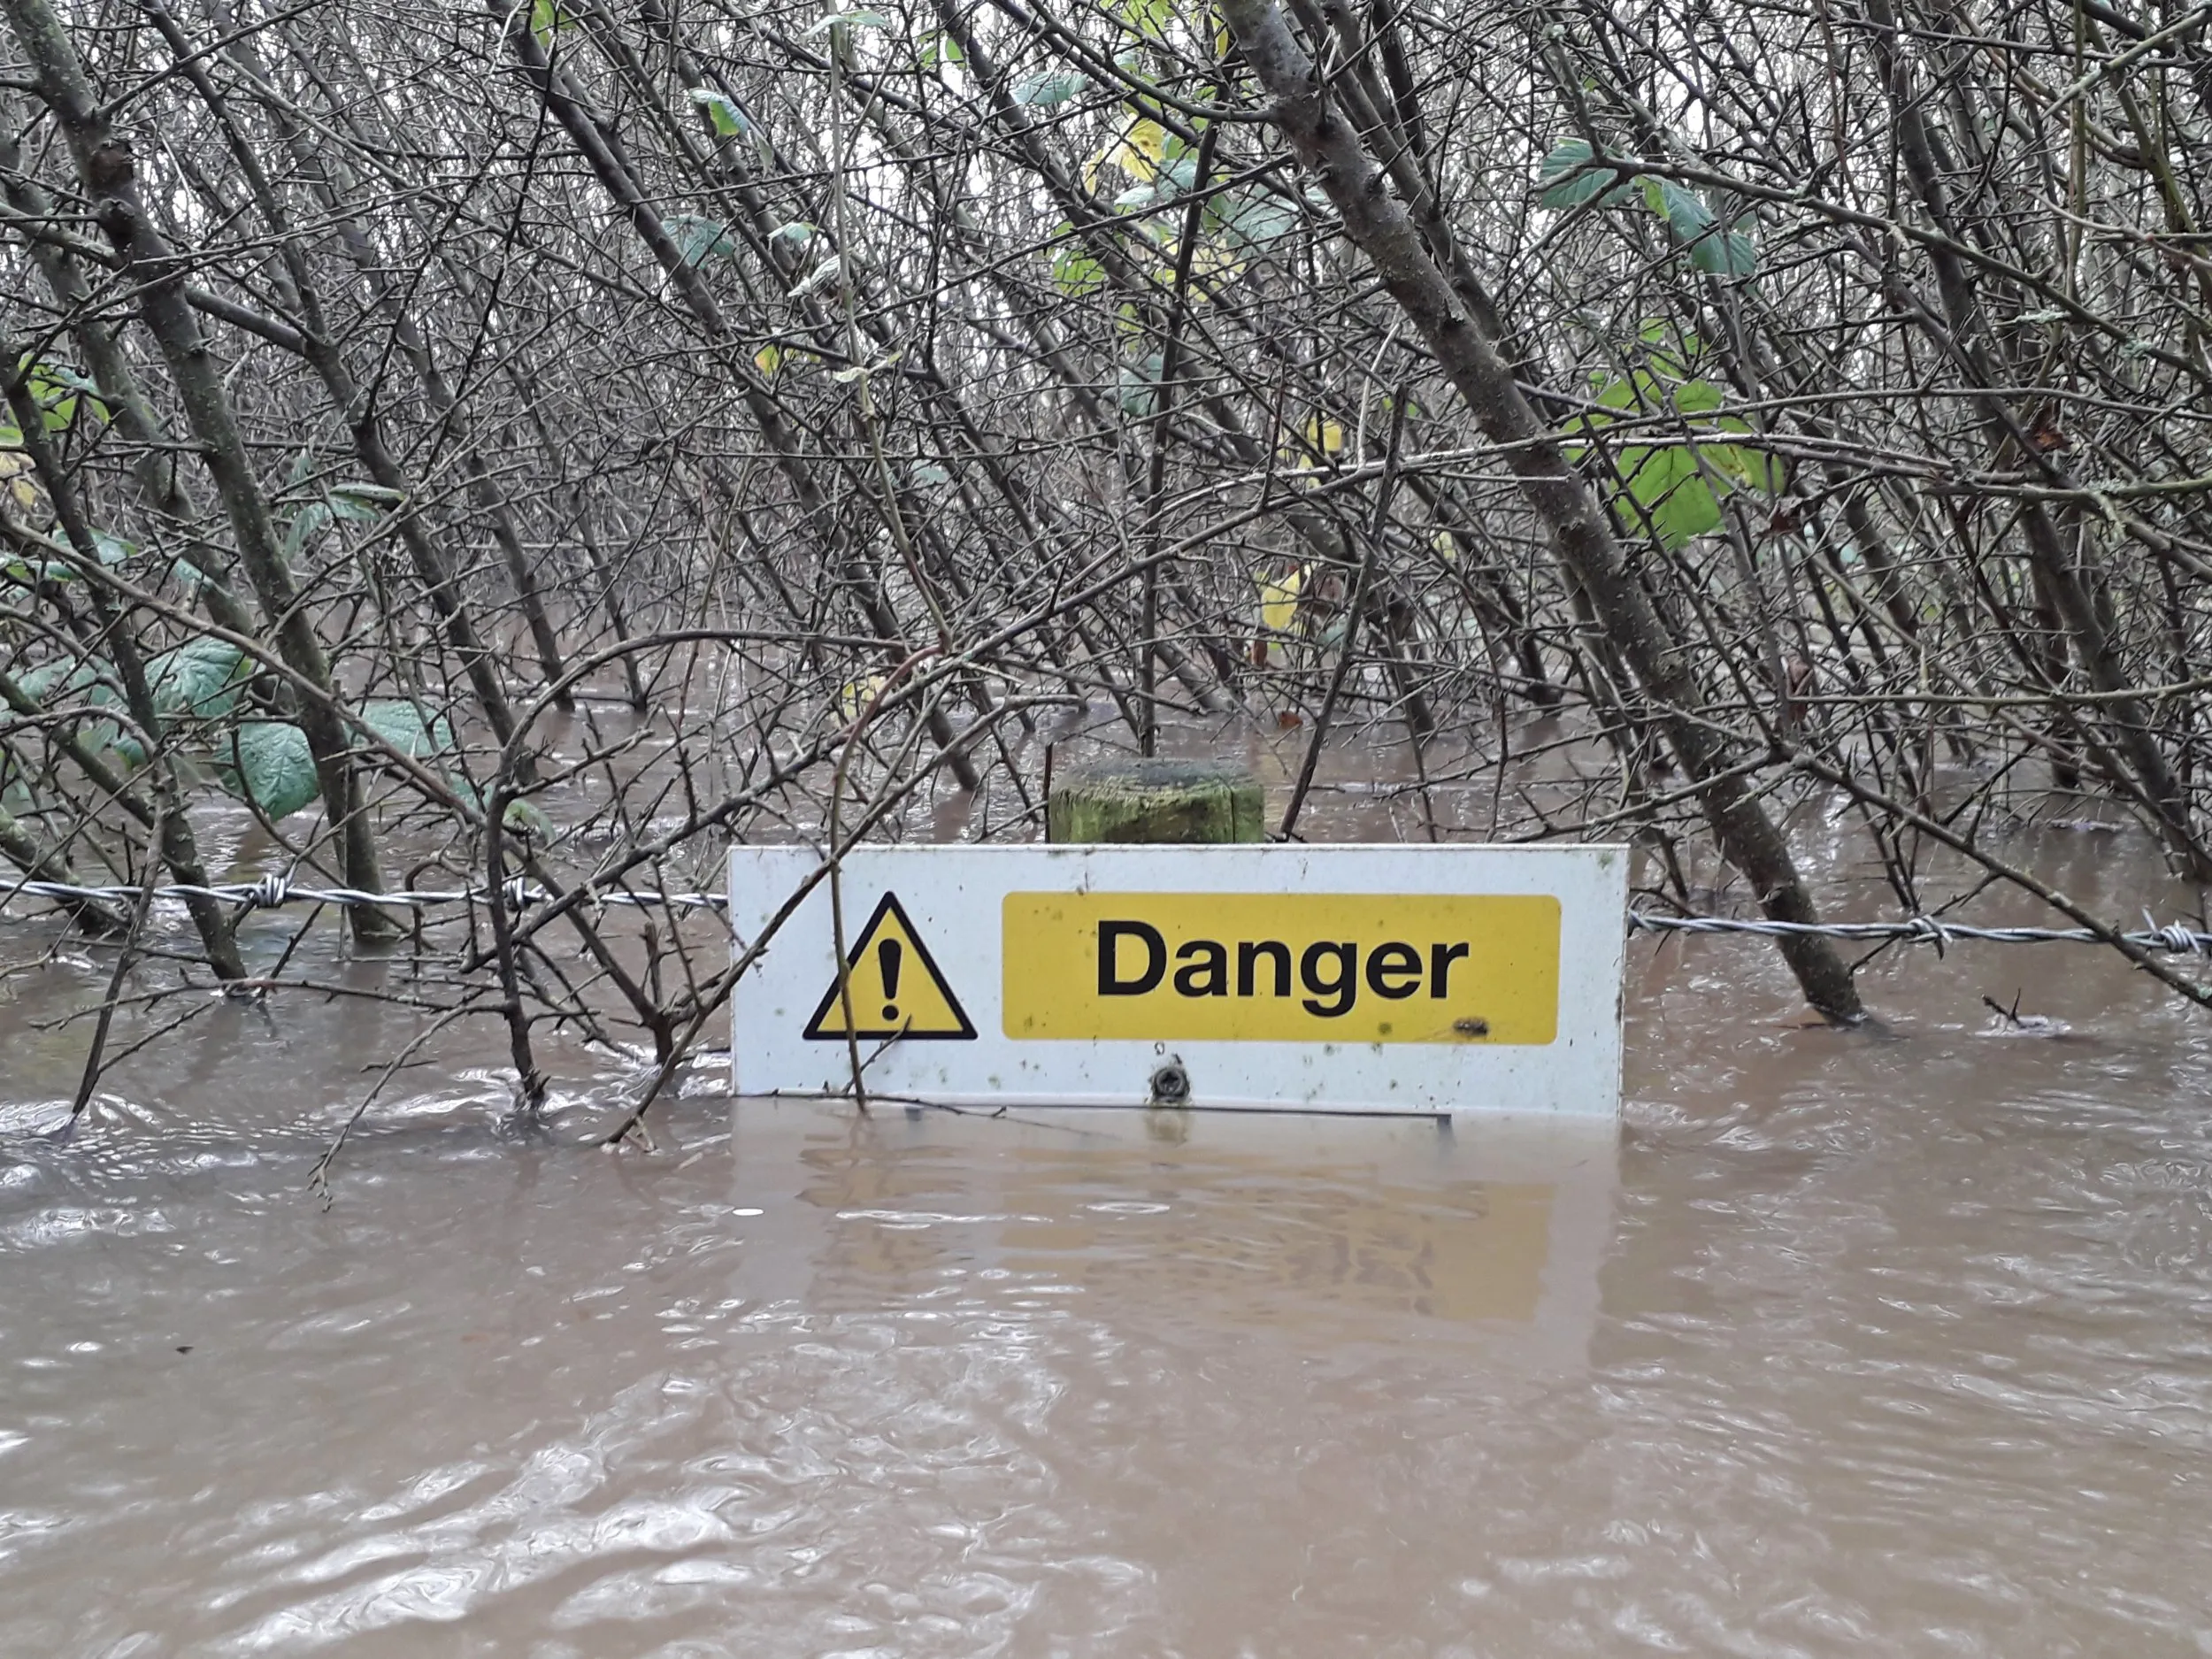 RSPB Langford Lowfields, with flood water almost submerging a sign that reads 'Danger'.